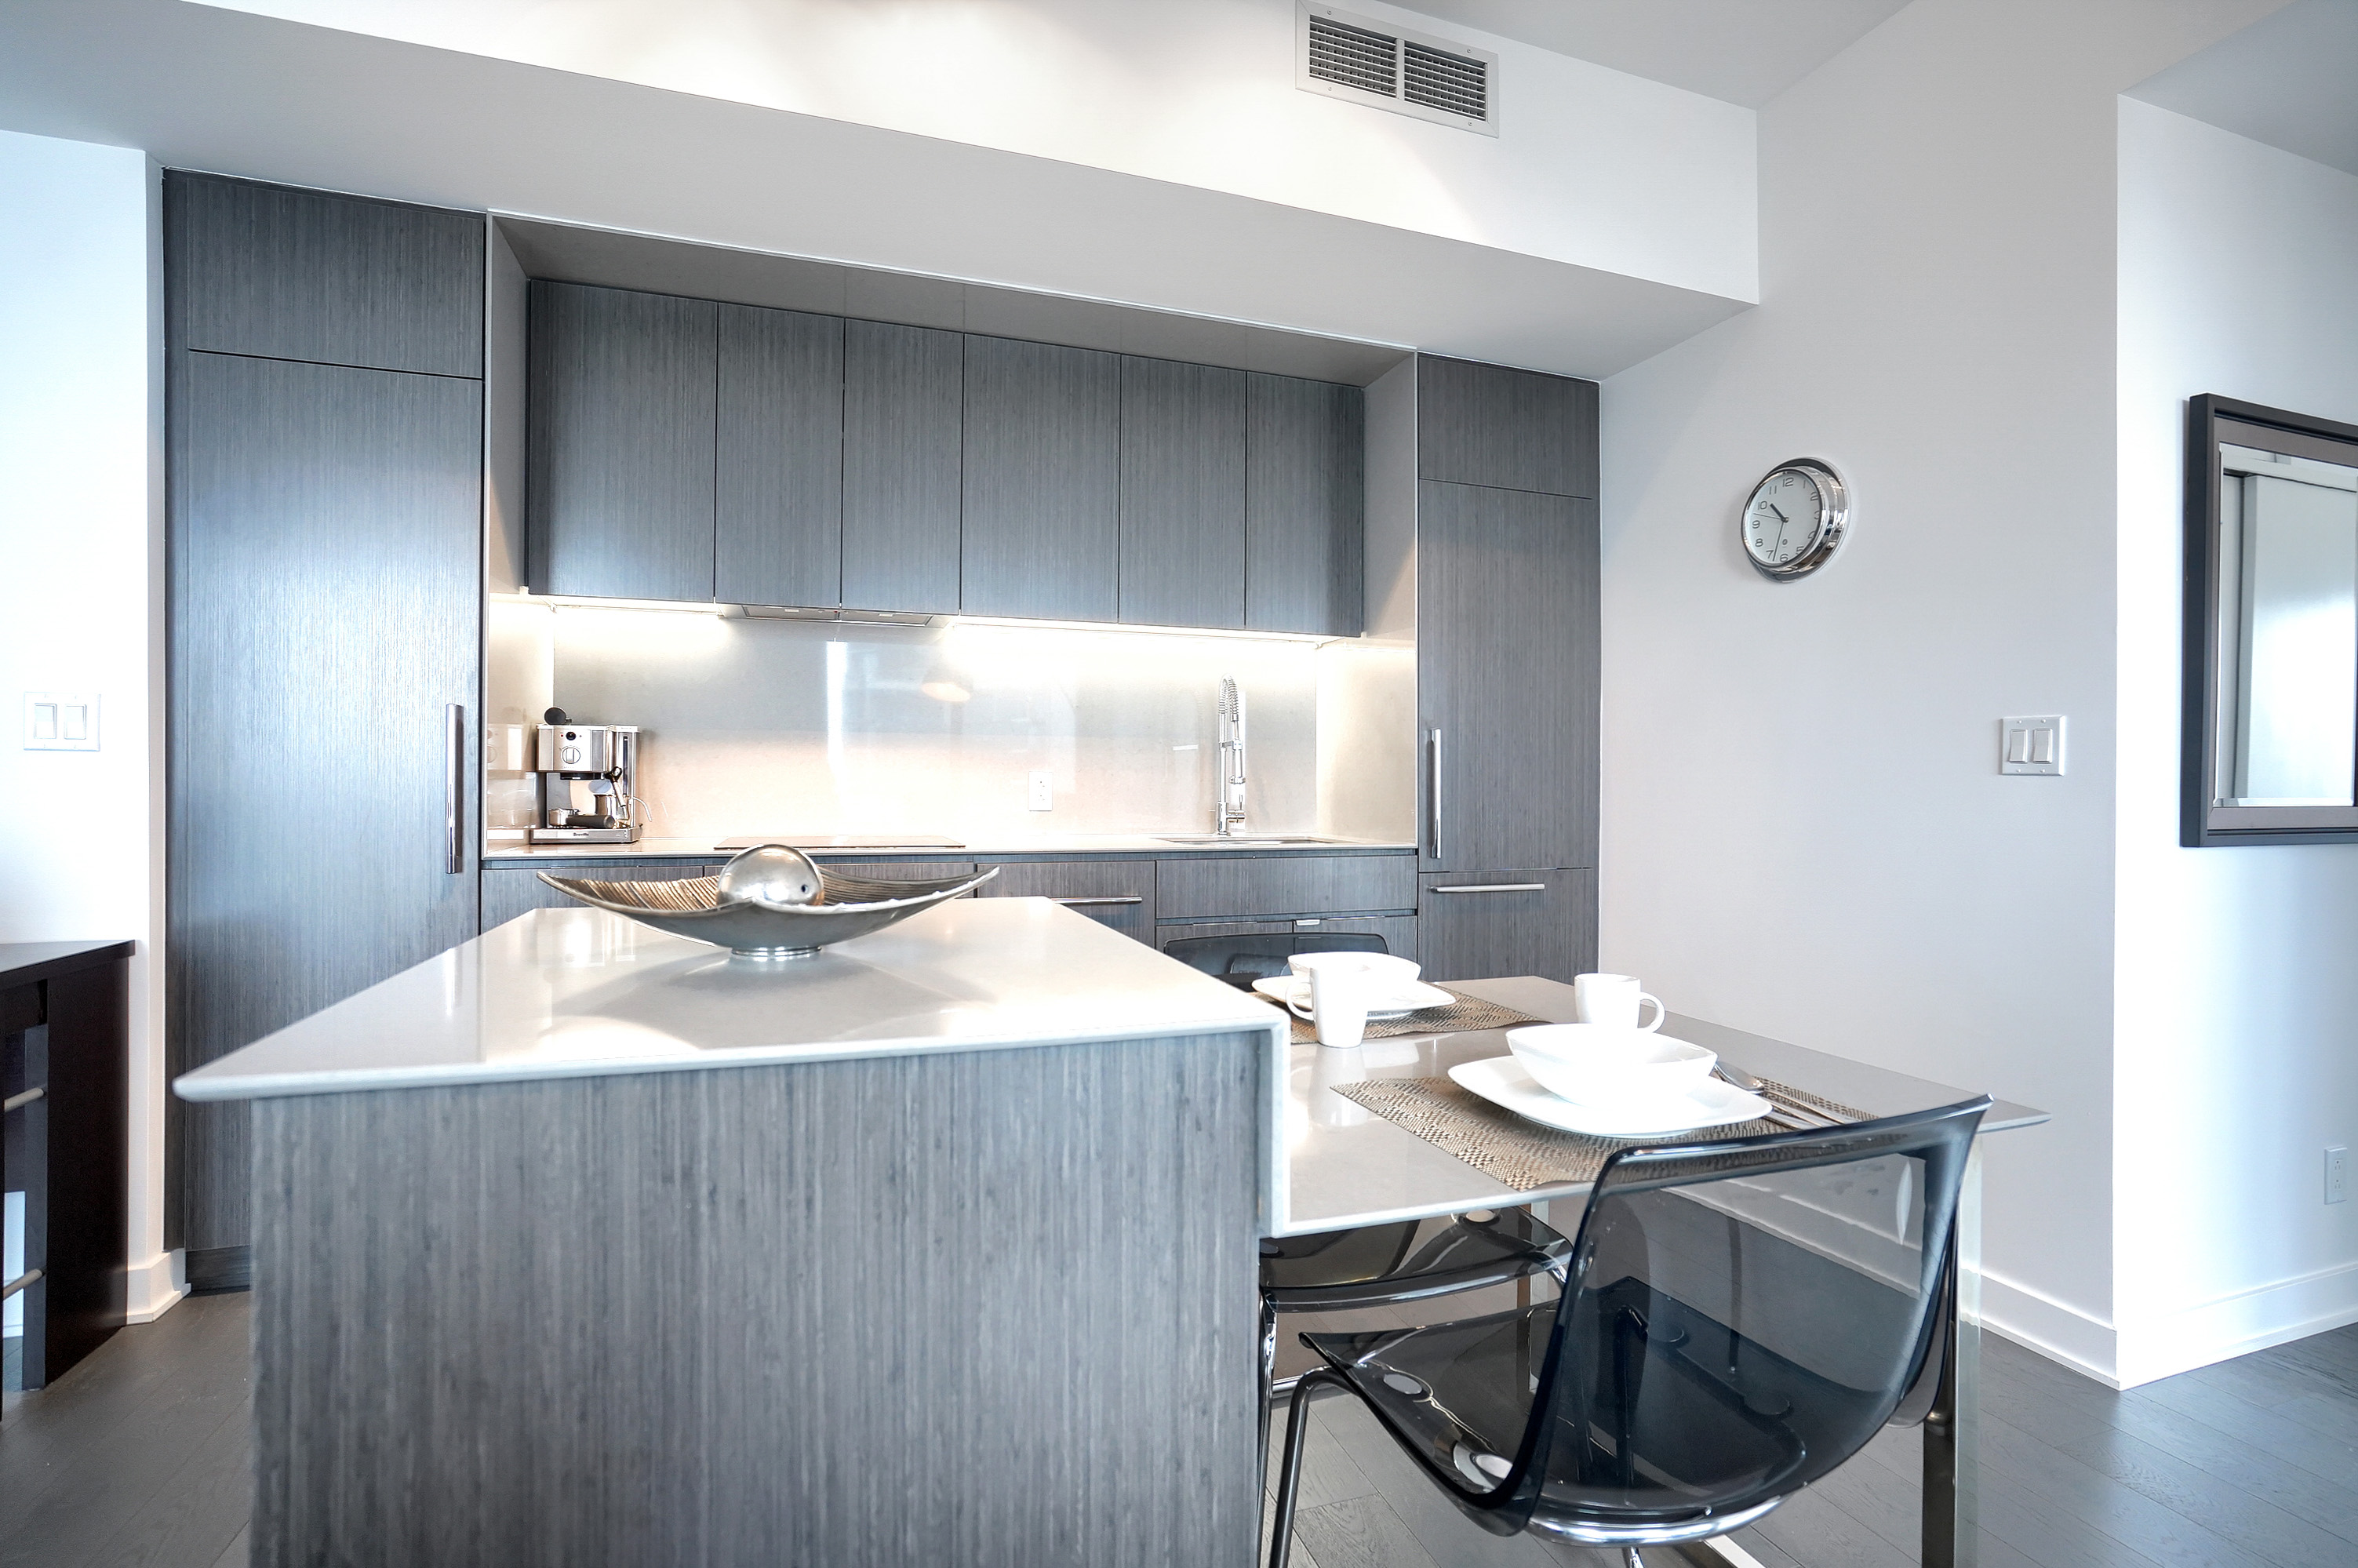 Close-up of the island counter and into the kitchen of this sleek and modern furnished corporate apartment in montreal. Grays and whites. Inset refrigerator and pantry. Flat top stove, overhead lighting and plenty of cabinet space